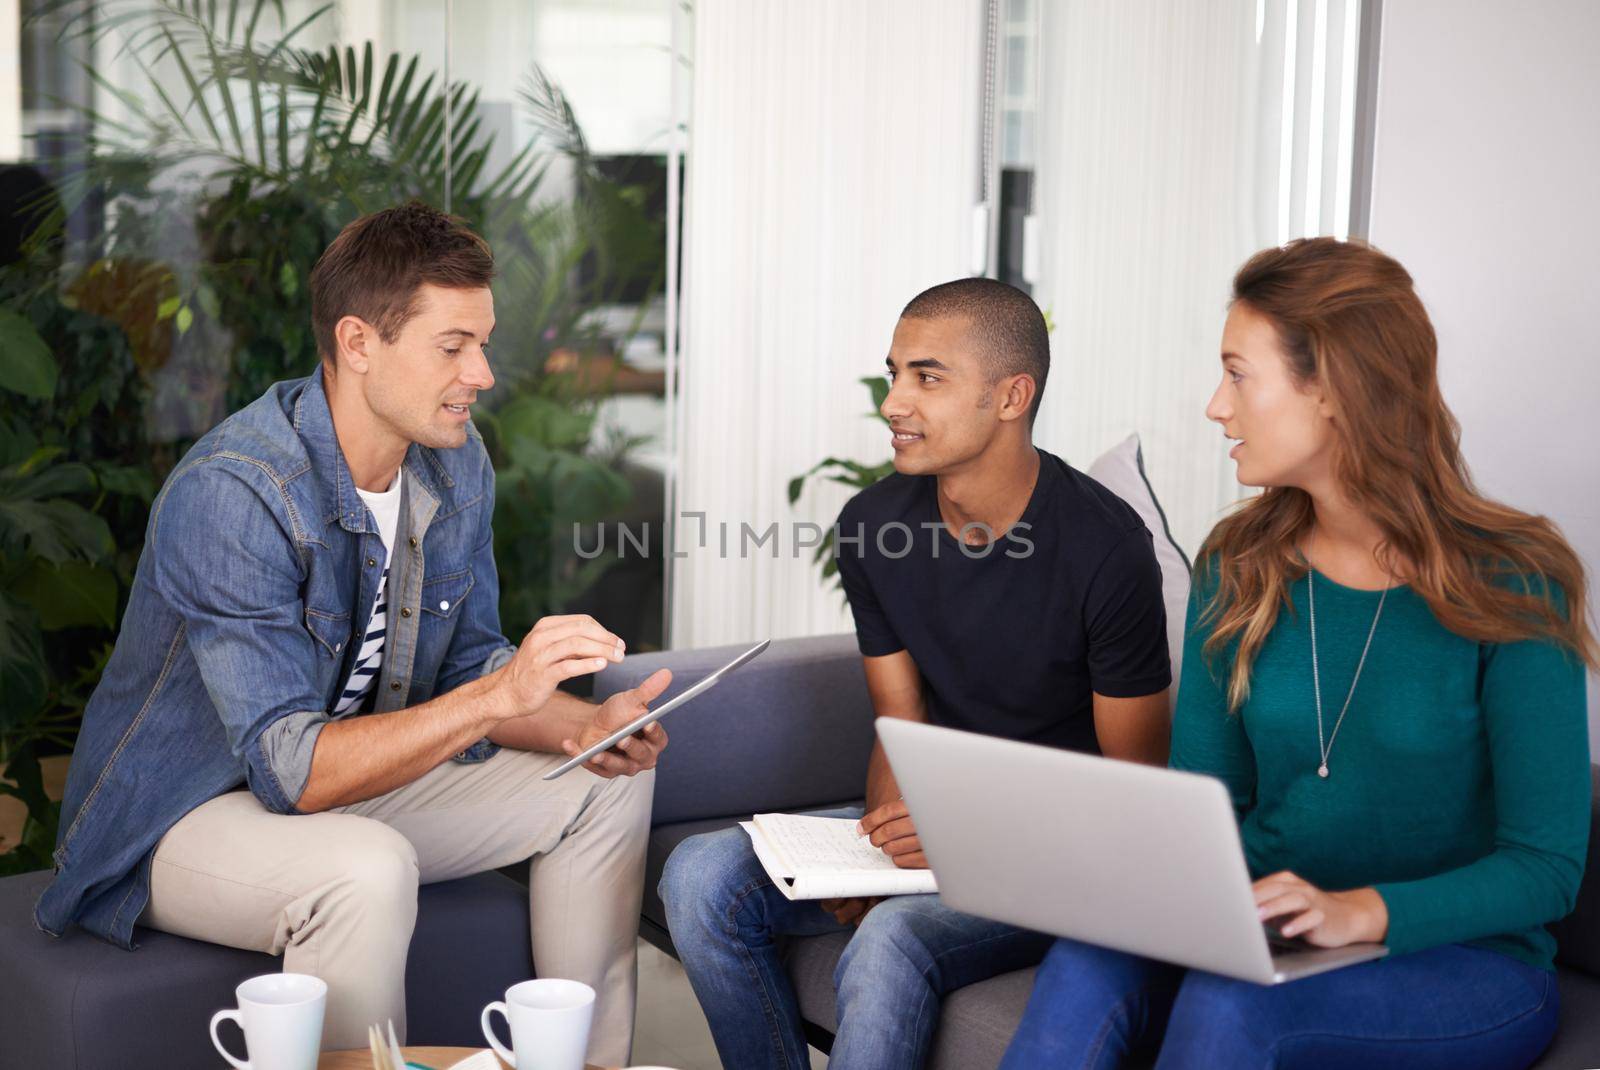 A team of young business professionals using technology in an informal meeting.